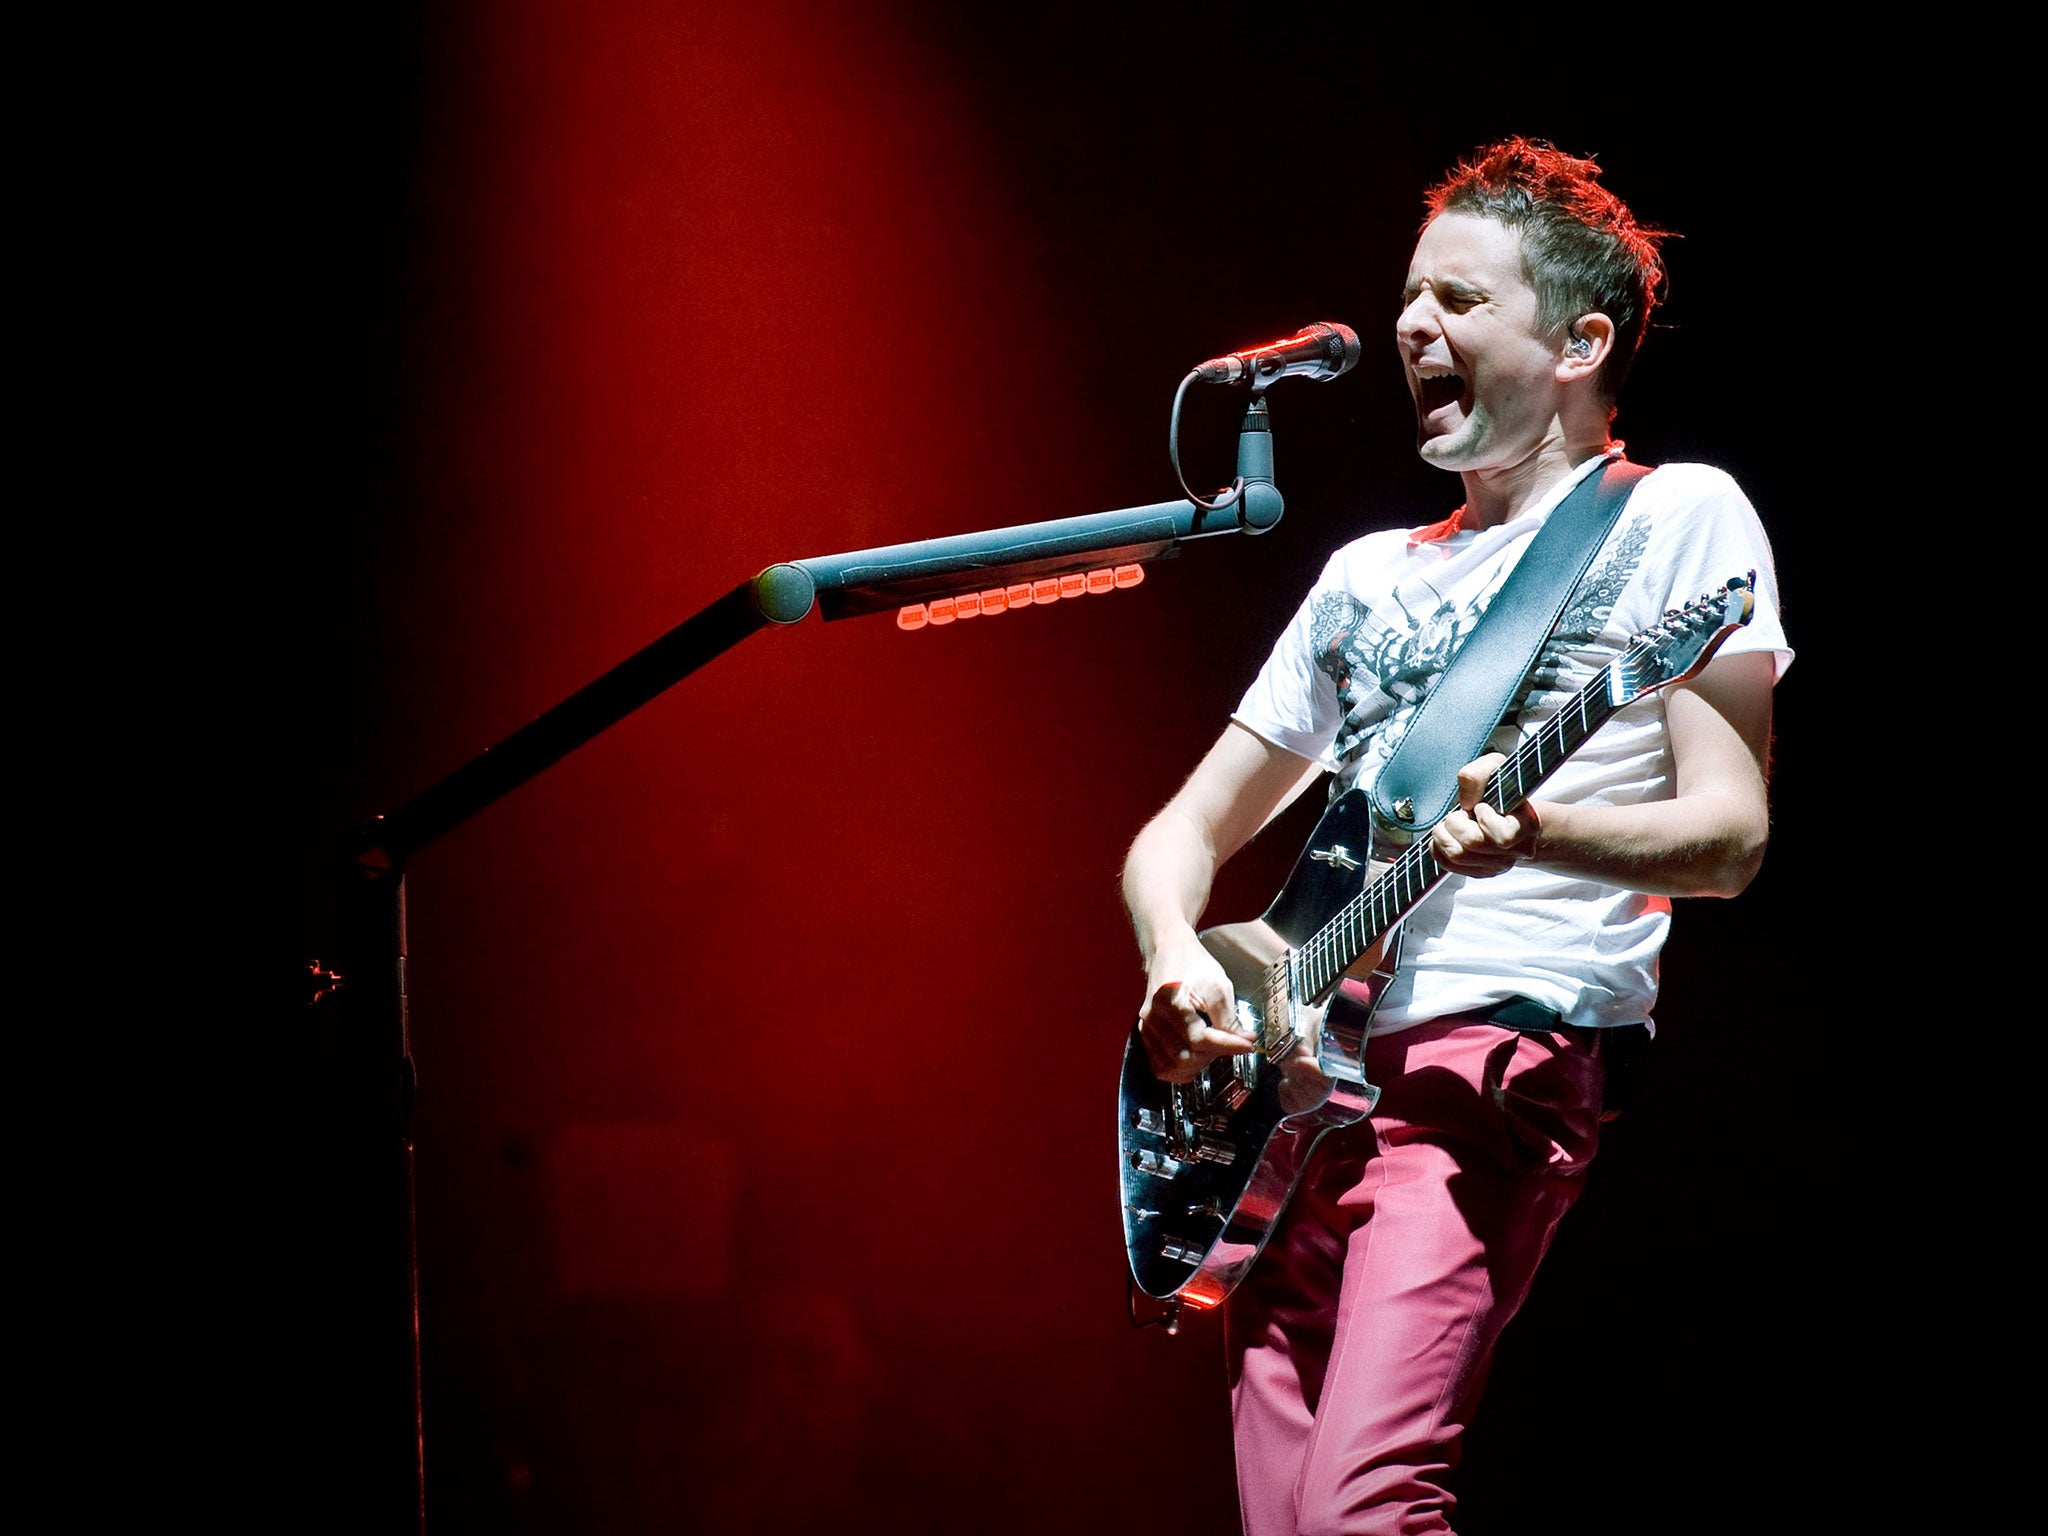 Matt Bellamy of 'Muse' on The Pyramid Stage in 2010. The band will be the first to headline the main stage all three nights of the festival